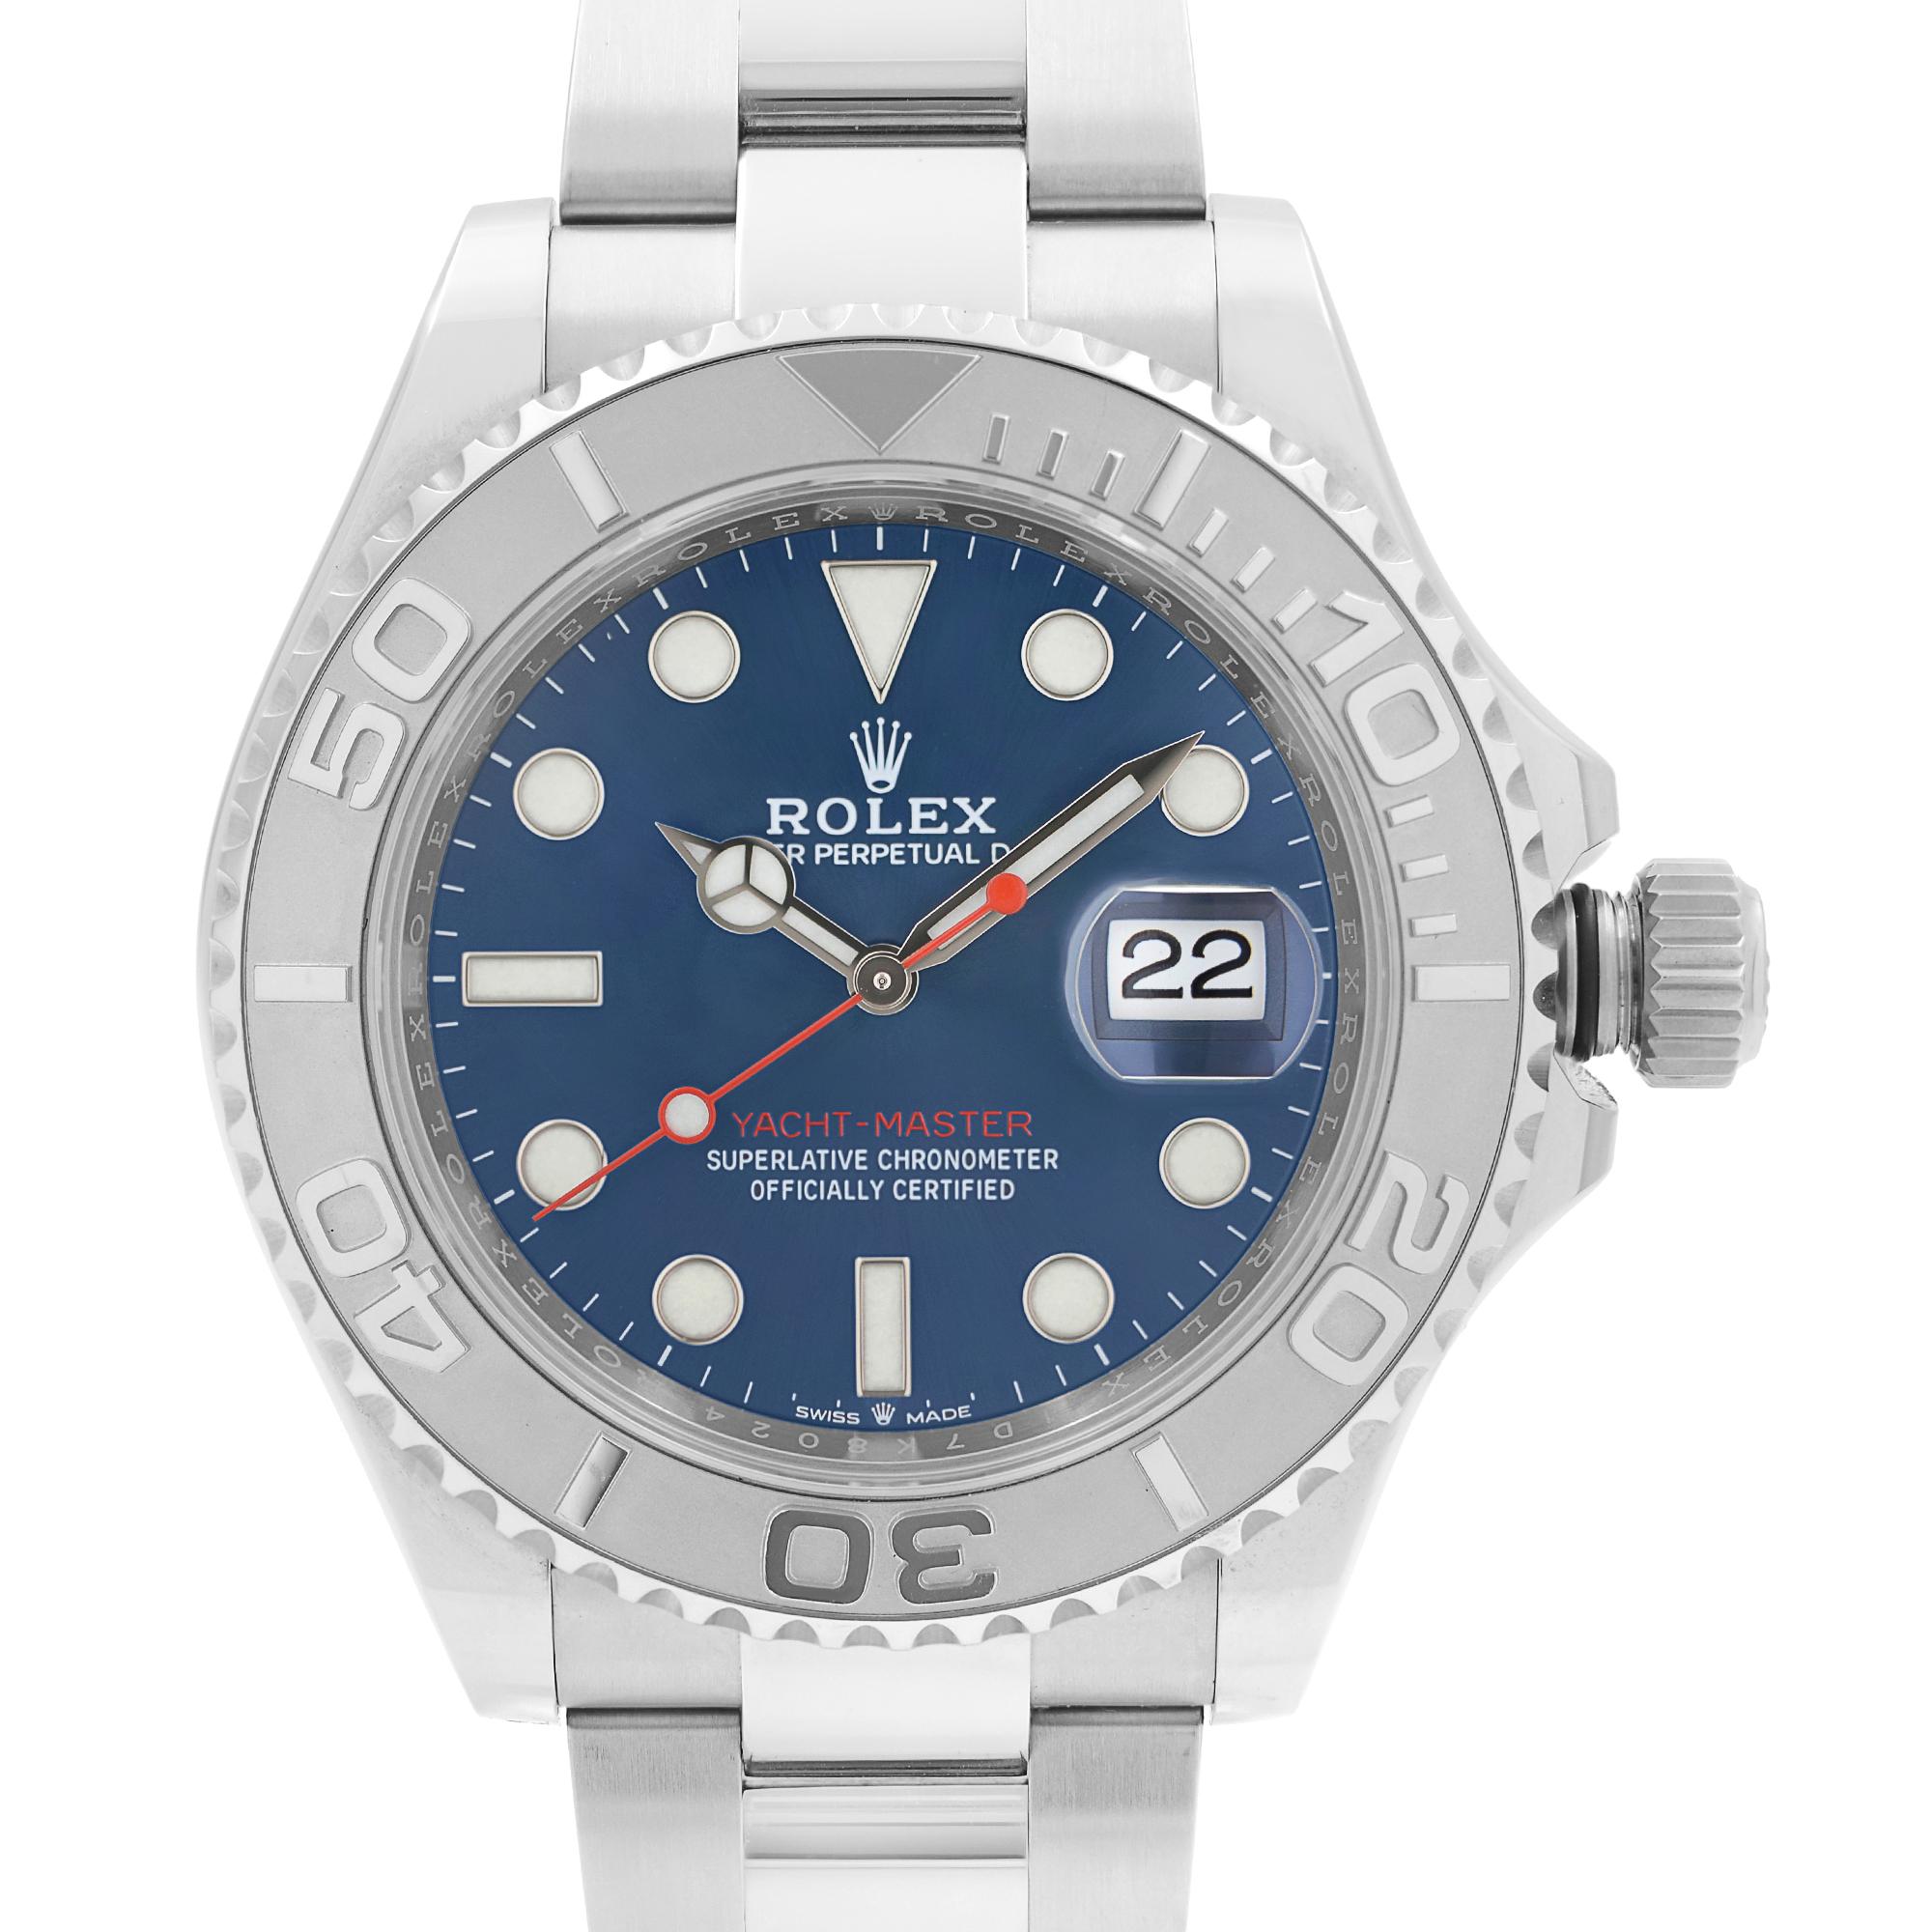 Pre Owned Rolex Yacht-Master 40MM Steel Platinum Blue Dial Automatic Men's Watch 126622. Great Condition. This Beautiful Timepiece Features: Stainless Steel Case with an Oyster Bracelet. Bidirectional Rotating Bezel with a Silver-Tone Sand Blasted